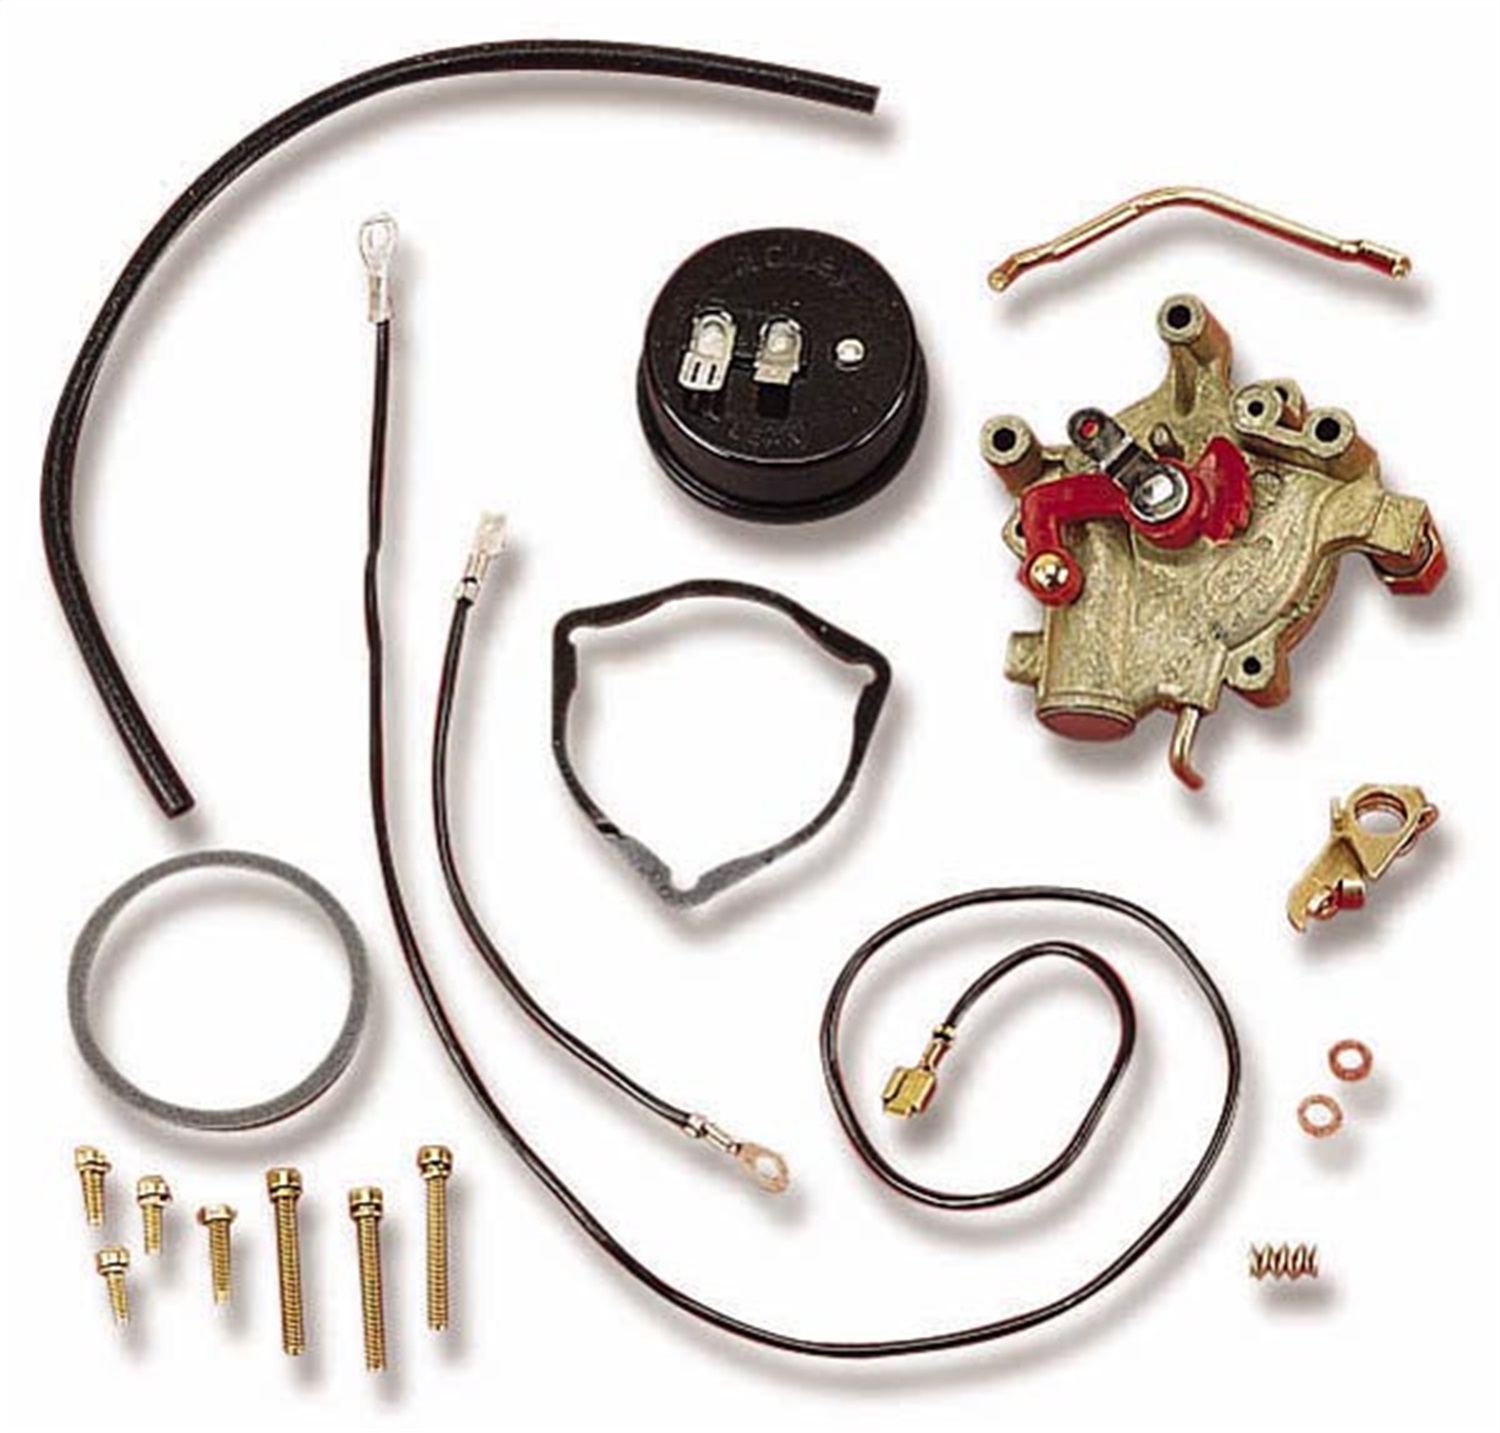 Holley Performance Holley Performance 45-224 Choke Conversion Kit